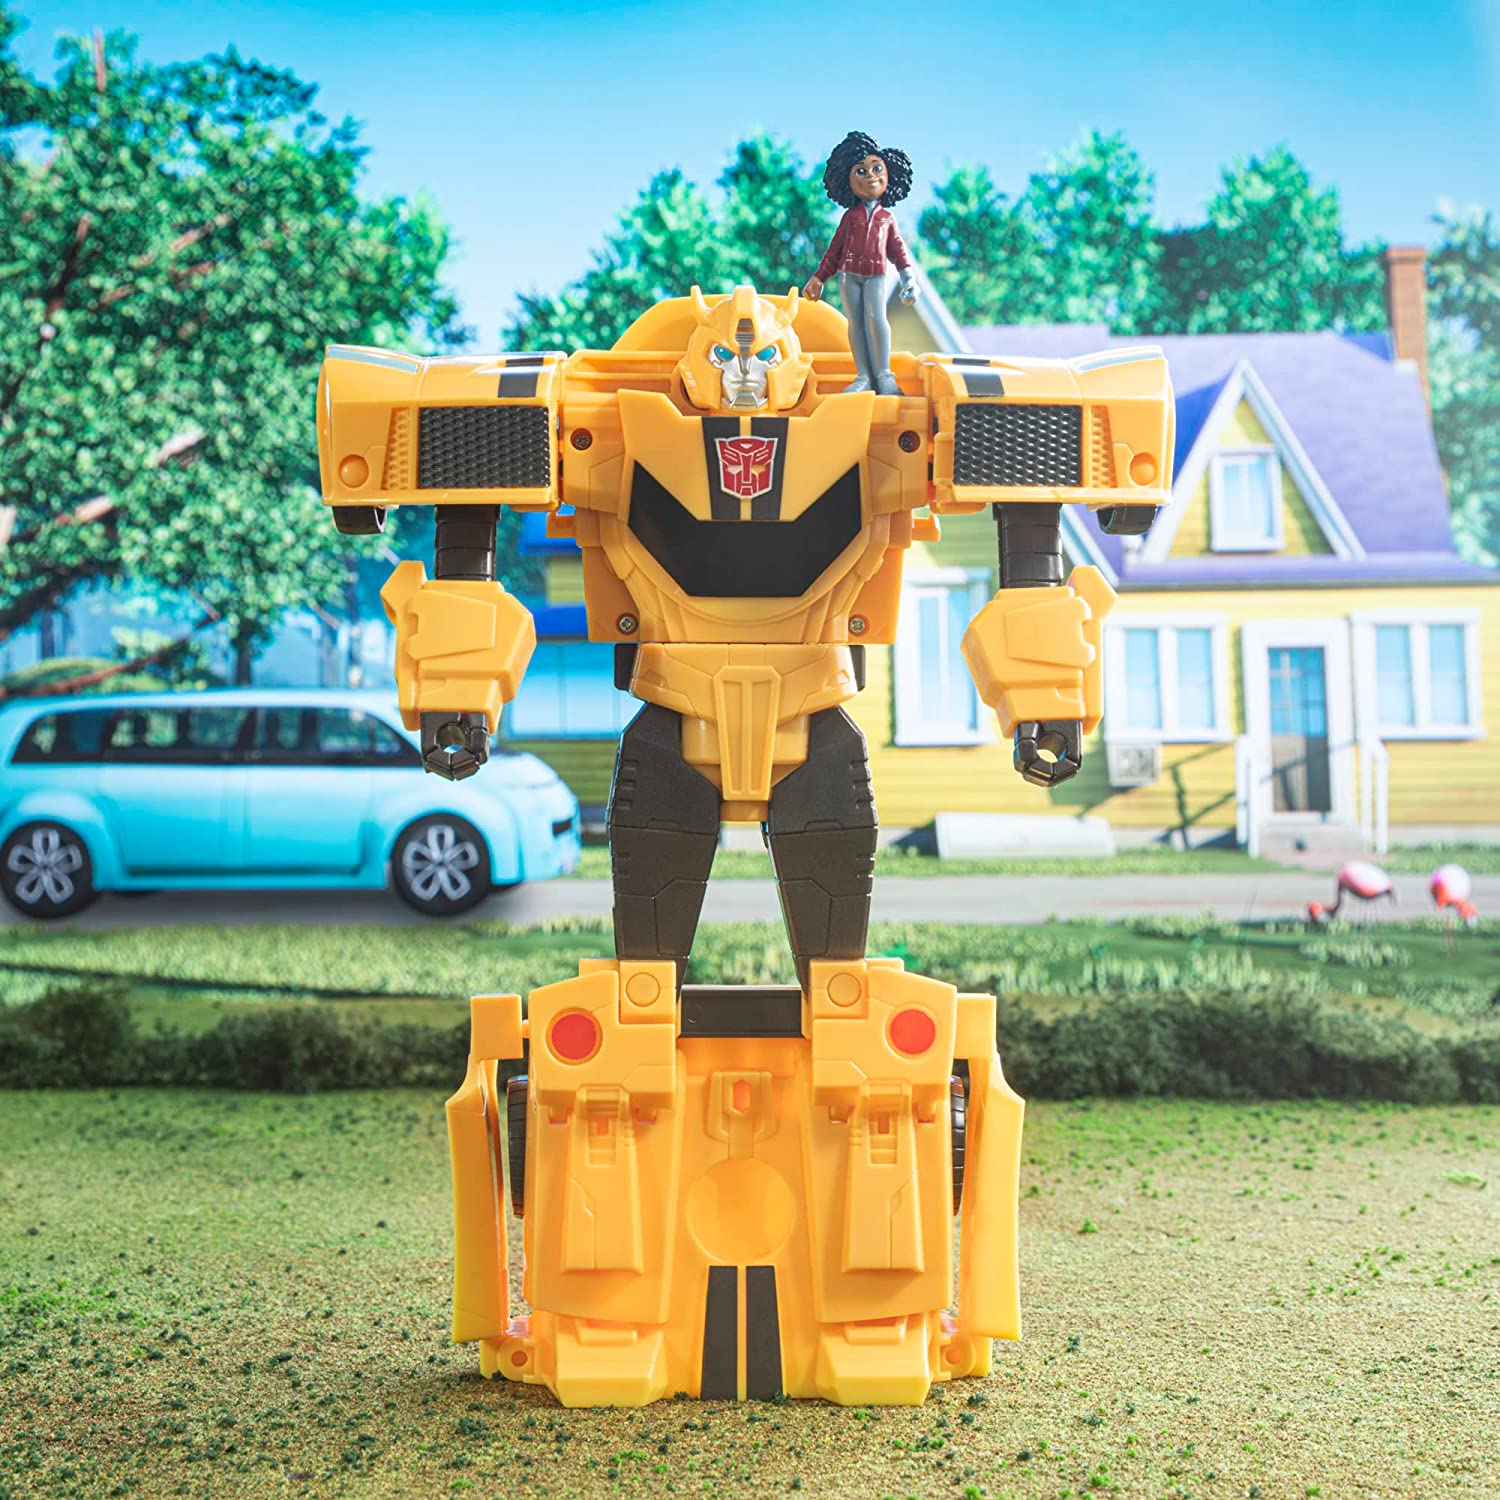 Transformers EarthSpark Spin Changer Bumblebee and Mo Malto Action Figure Robot Toy